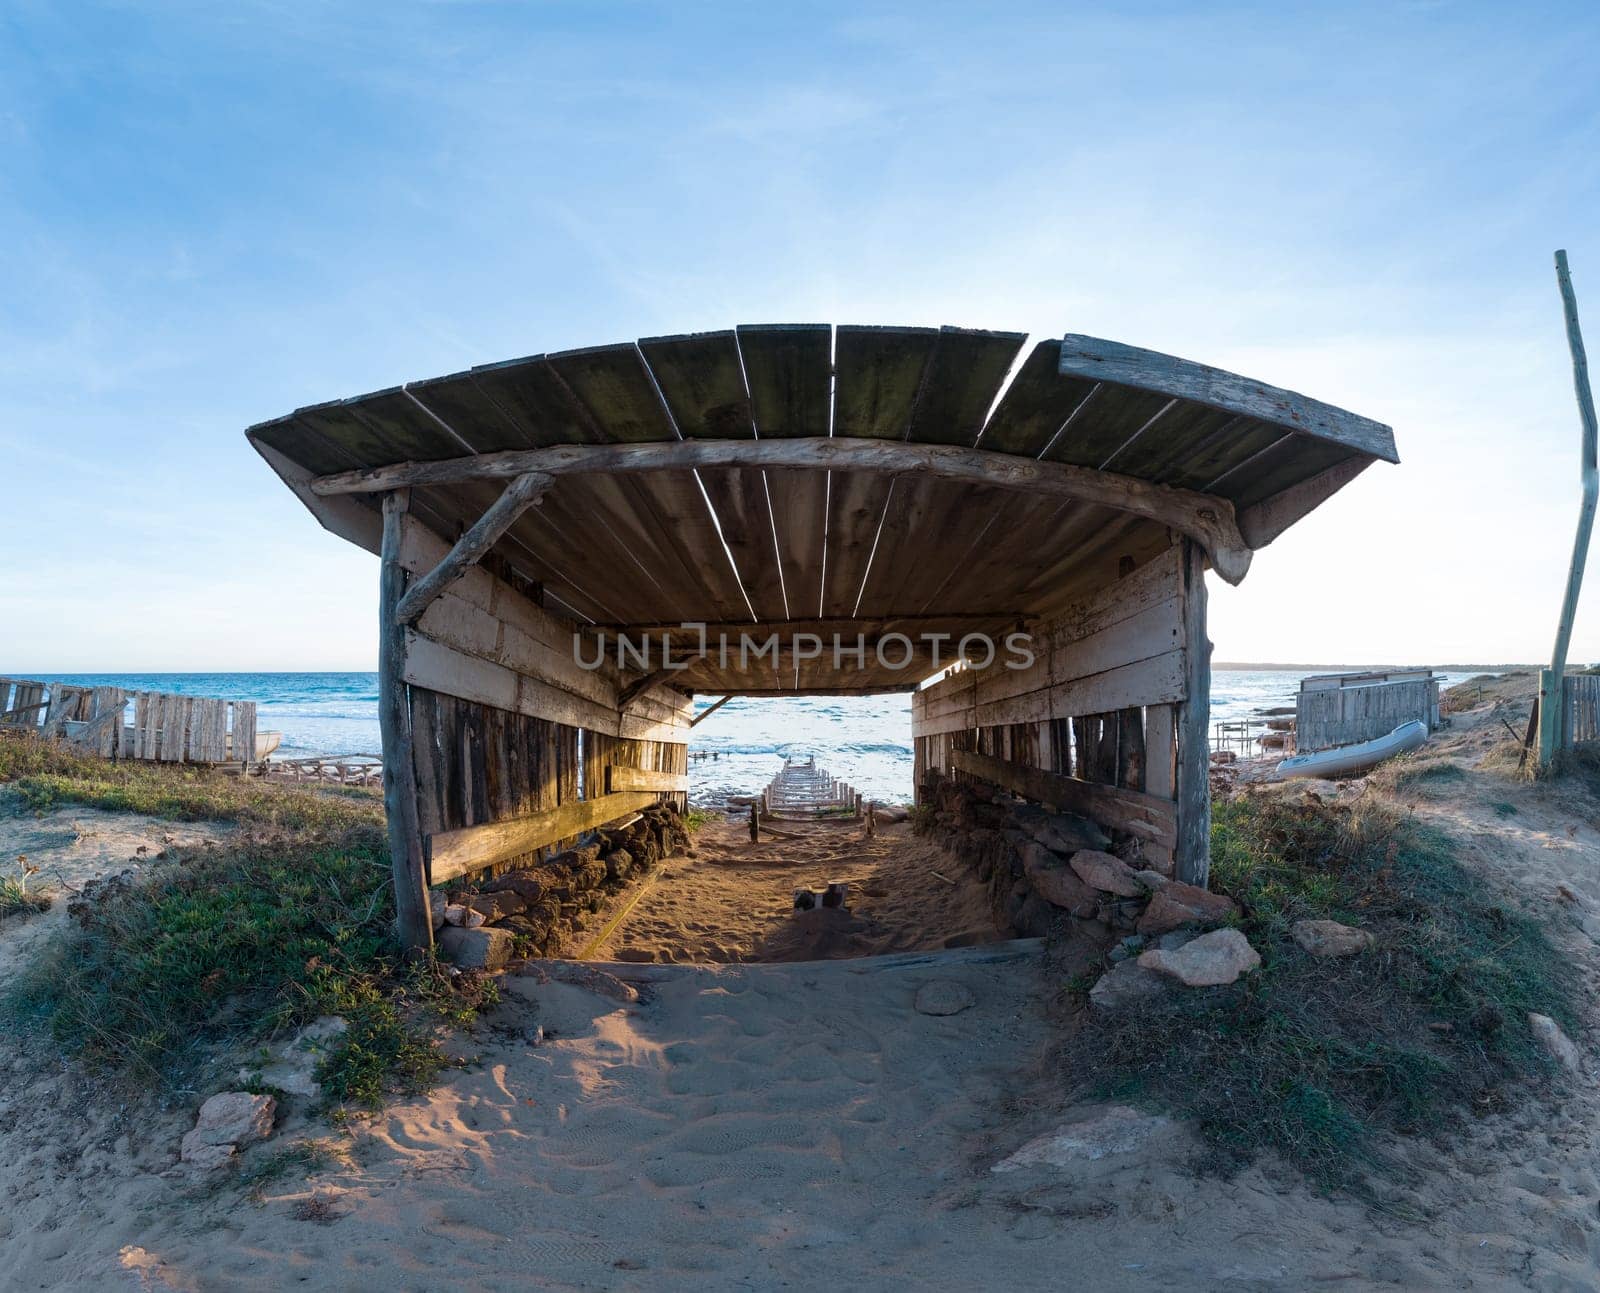 A picturesque scene of an old boat shed with a track to the sea at sunset.